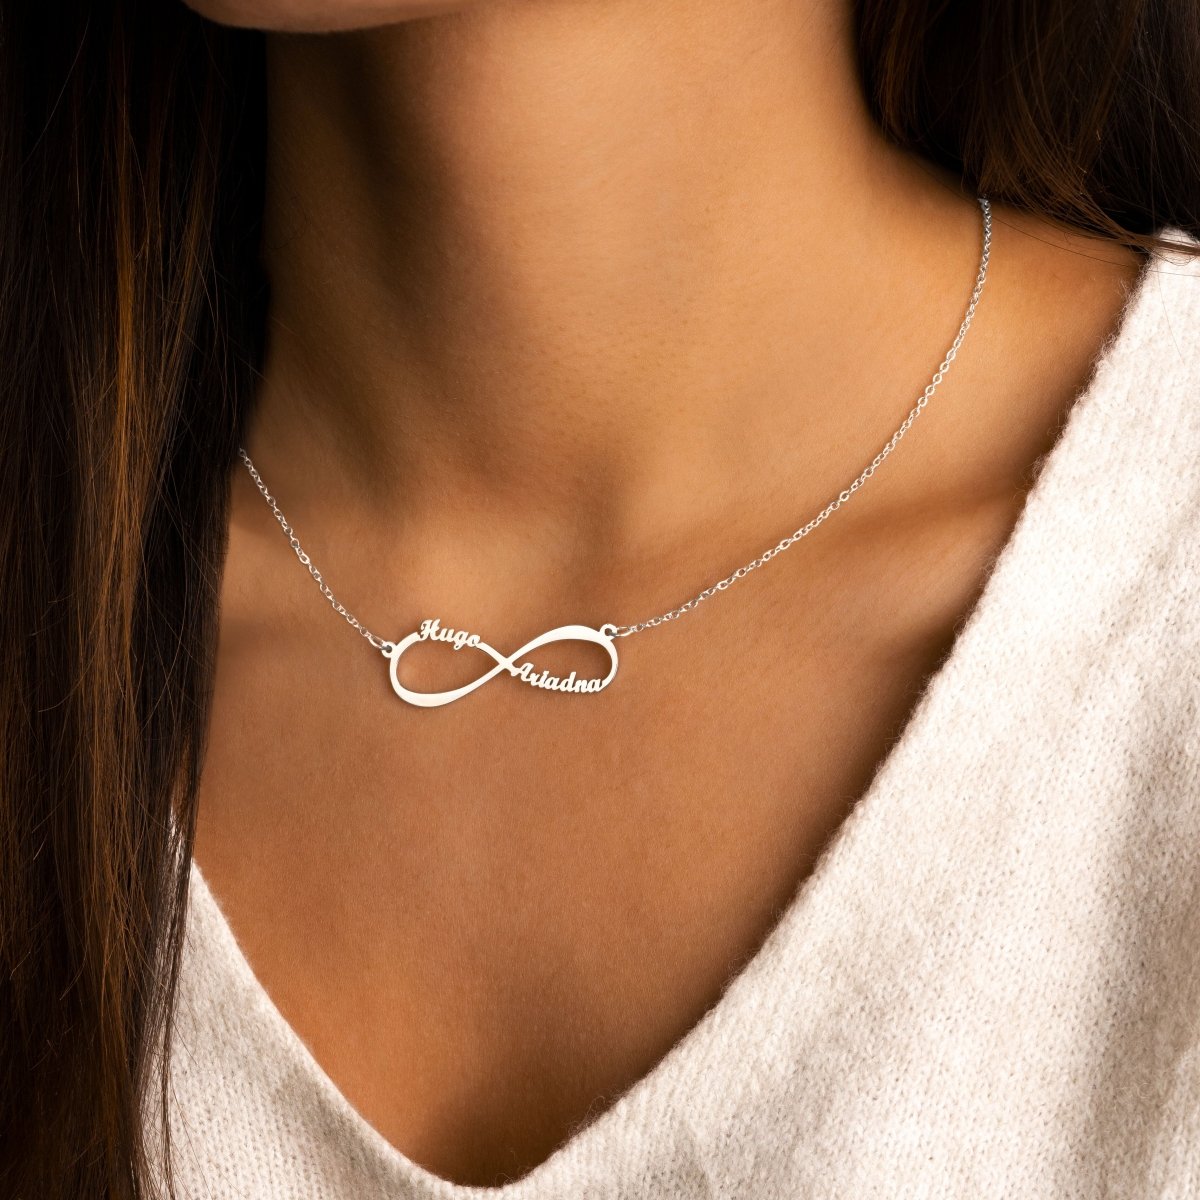 Gold Infinity lariat,initial infinity necklace,Sideways infinity  lariat,monogram lariat,hand stamped initial,friendship gift,bridesmaid gift